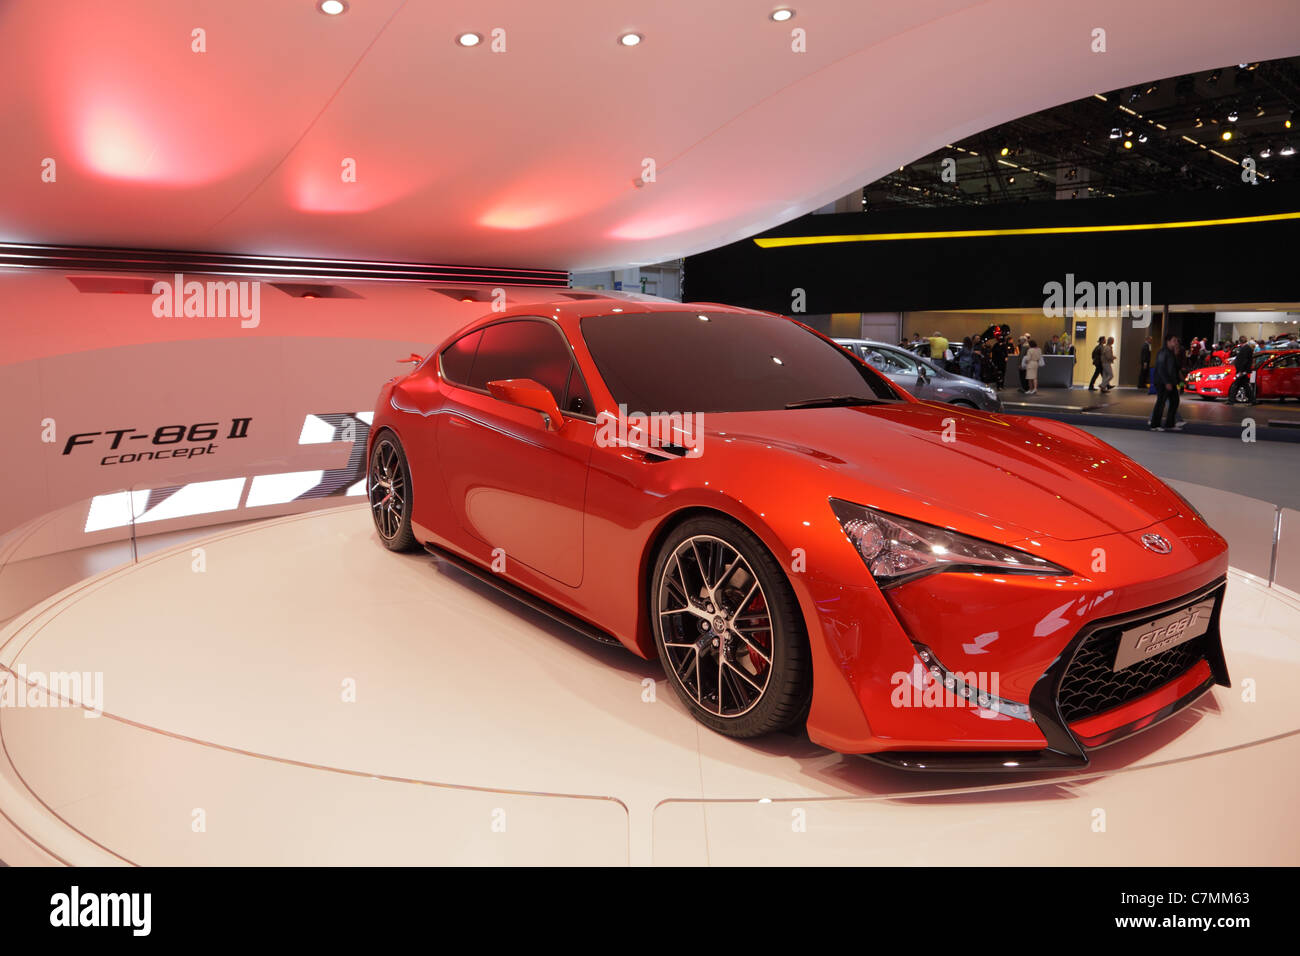 Toyota FT-86 II Concept Car at the 64th IAA (Internationale Automobil Ausstellung) on September 24, 2011 Stock Photo